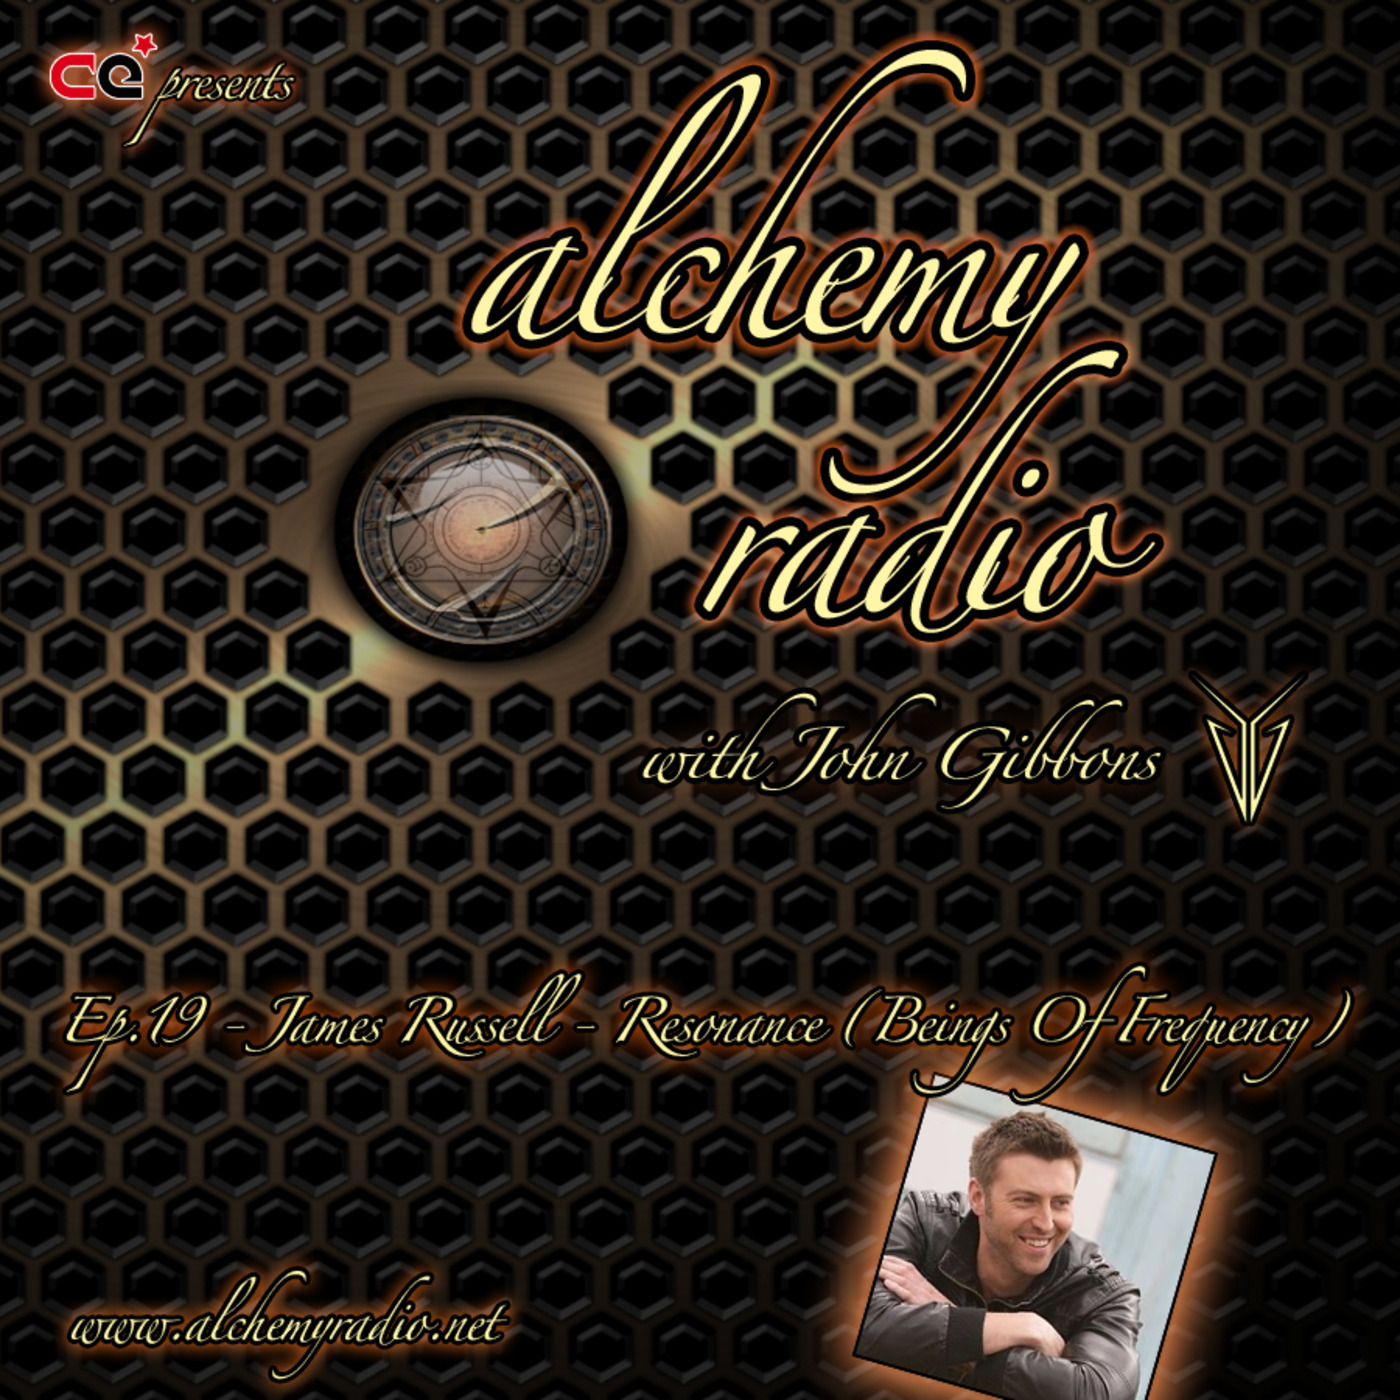 Alchemy Radio 019 - James Russell - Resonance (Beings Of Frequency)